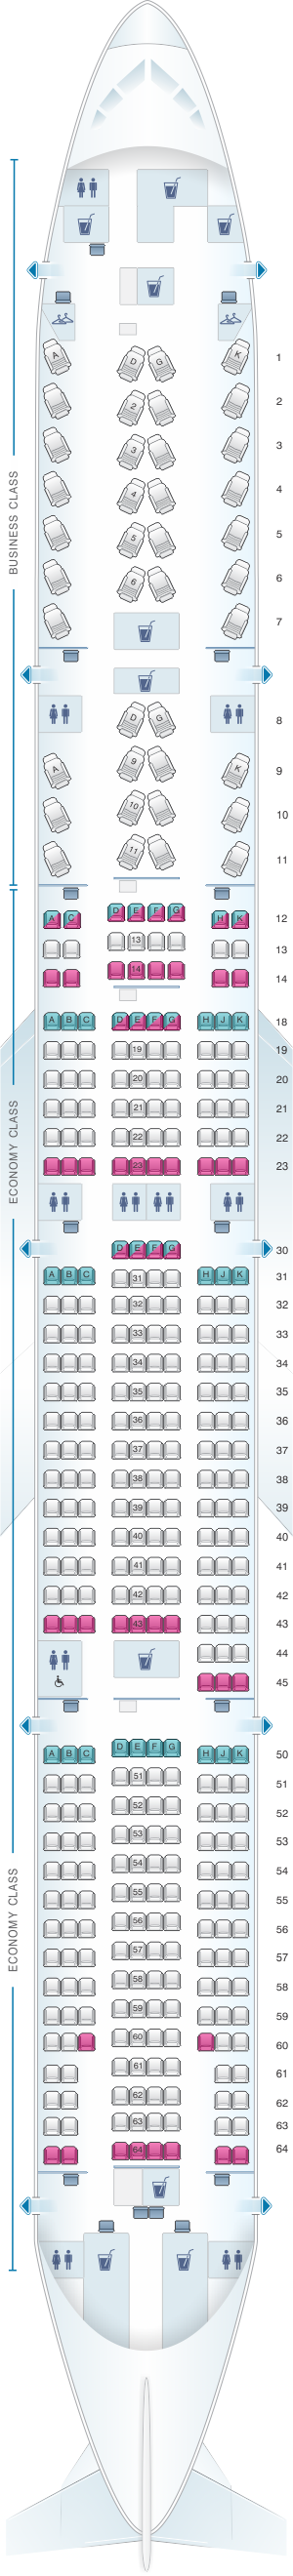 Seat map for Air Canada Boeing B777 300ER (77W) North America Layout 1